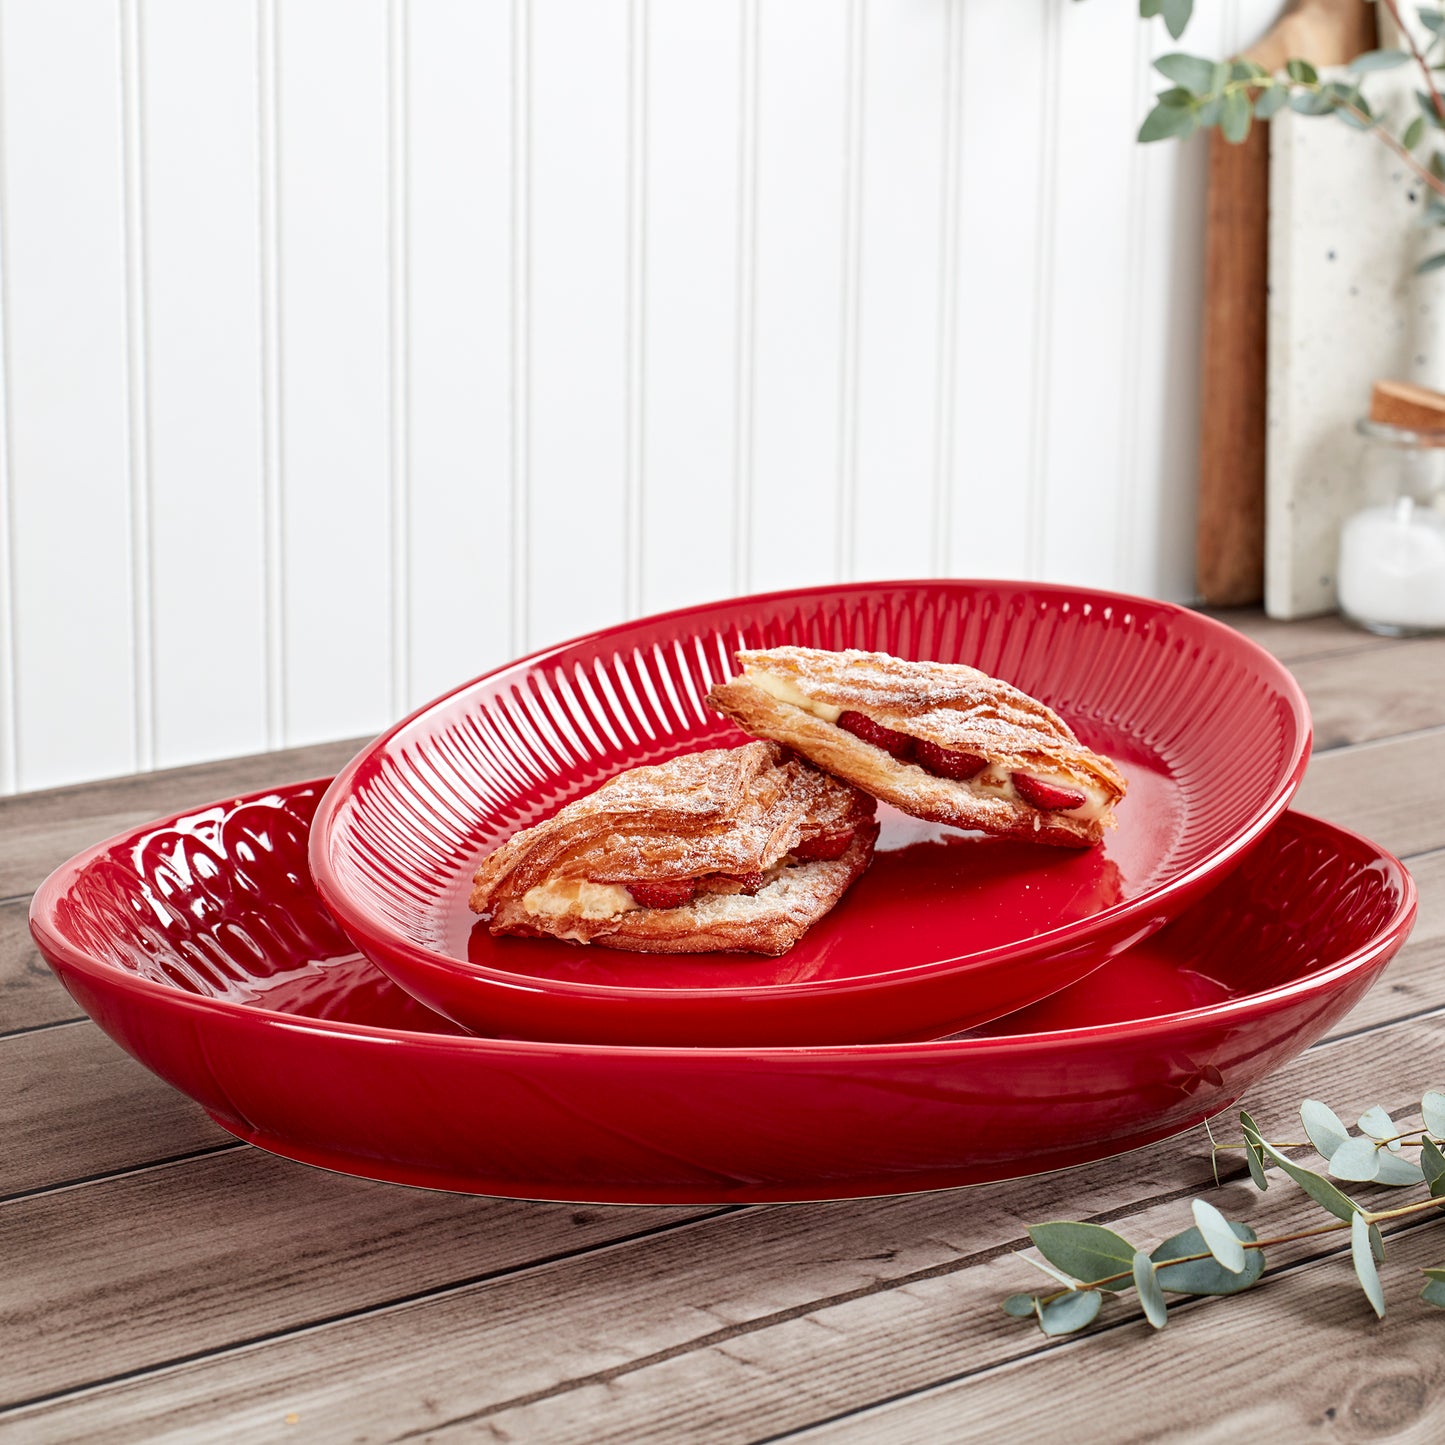 Dolly Set of 2 Oval Platters - Red